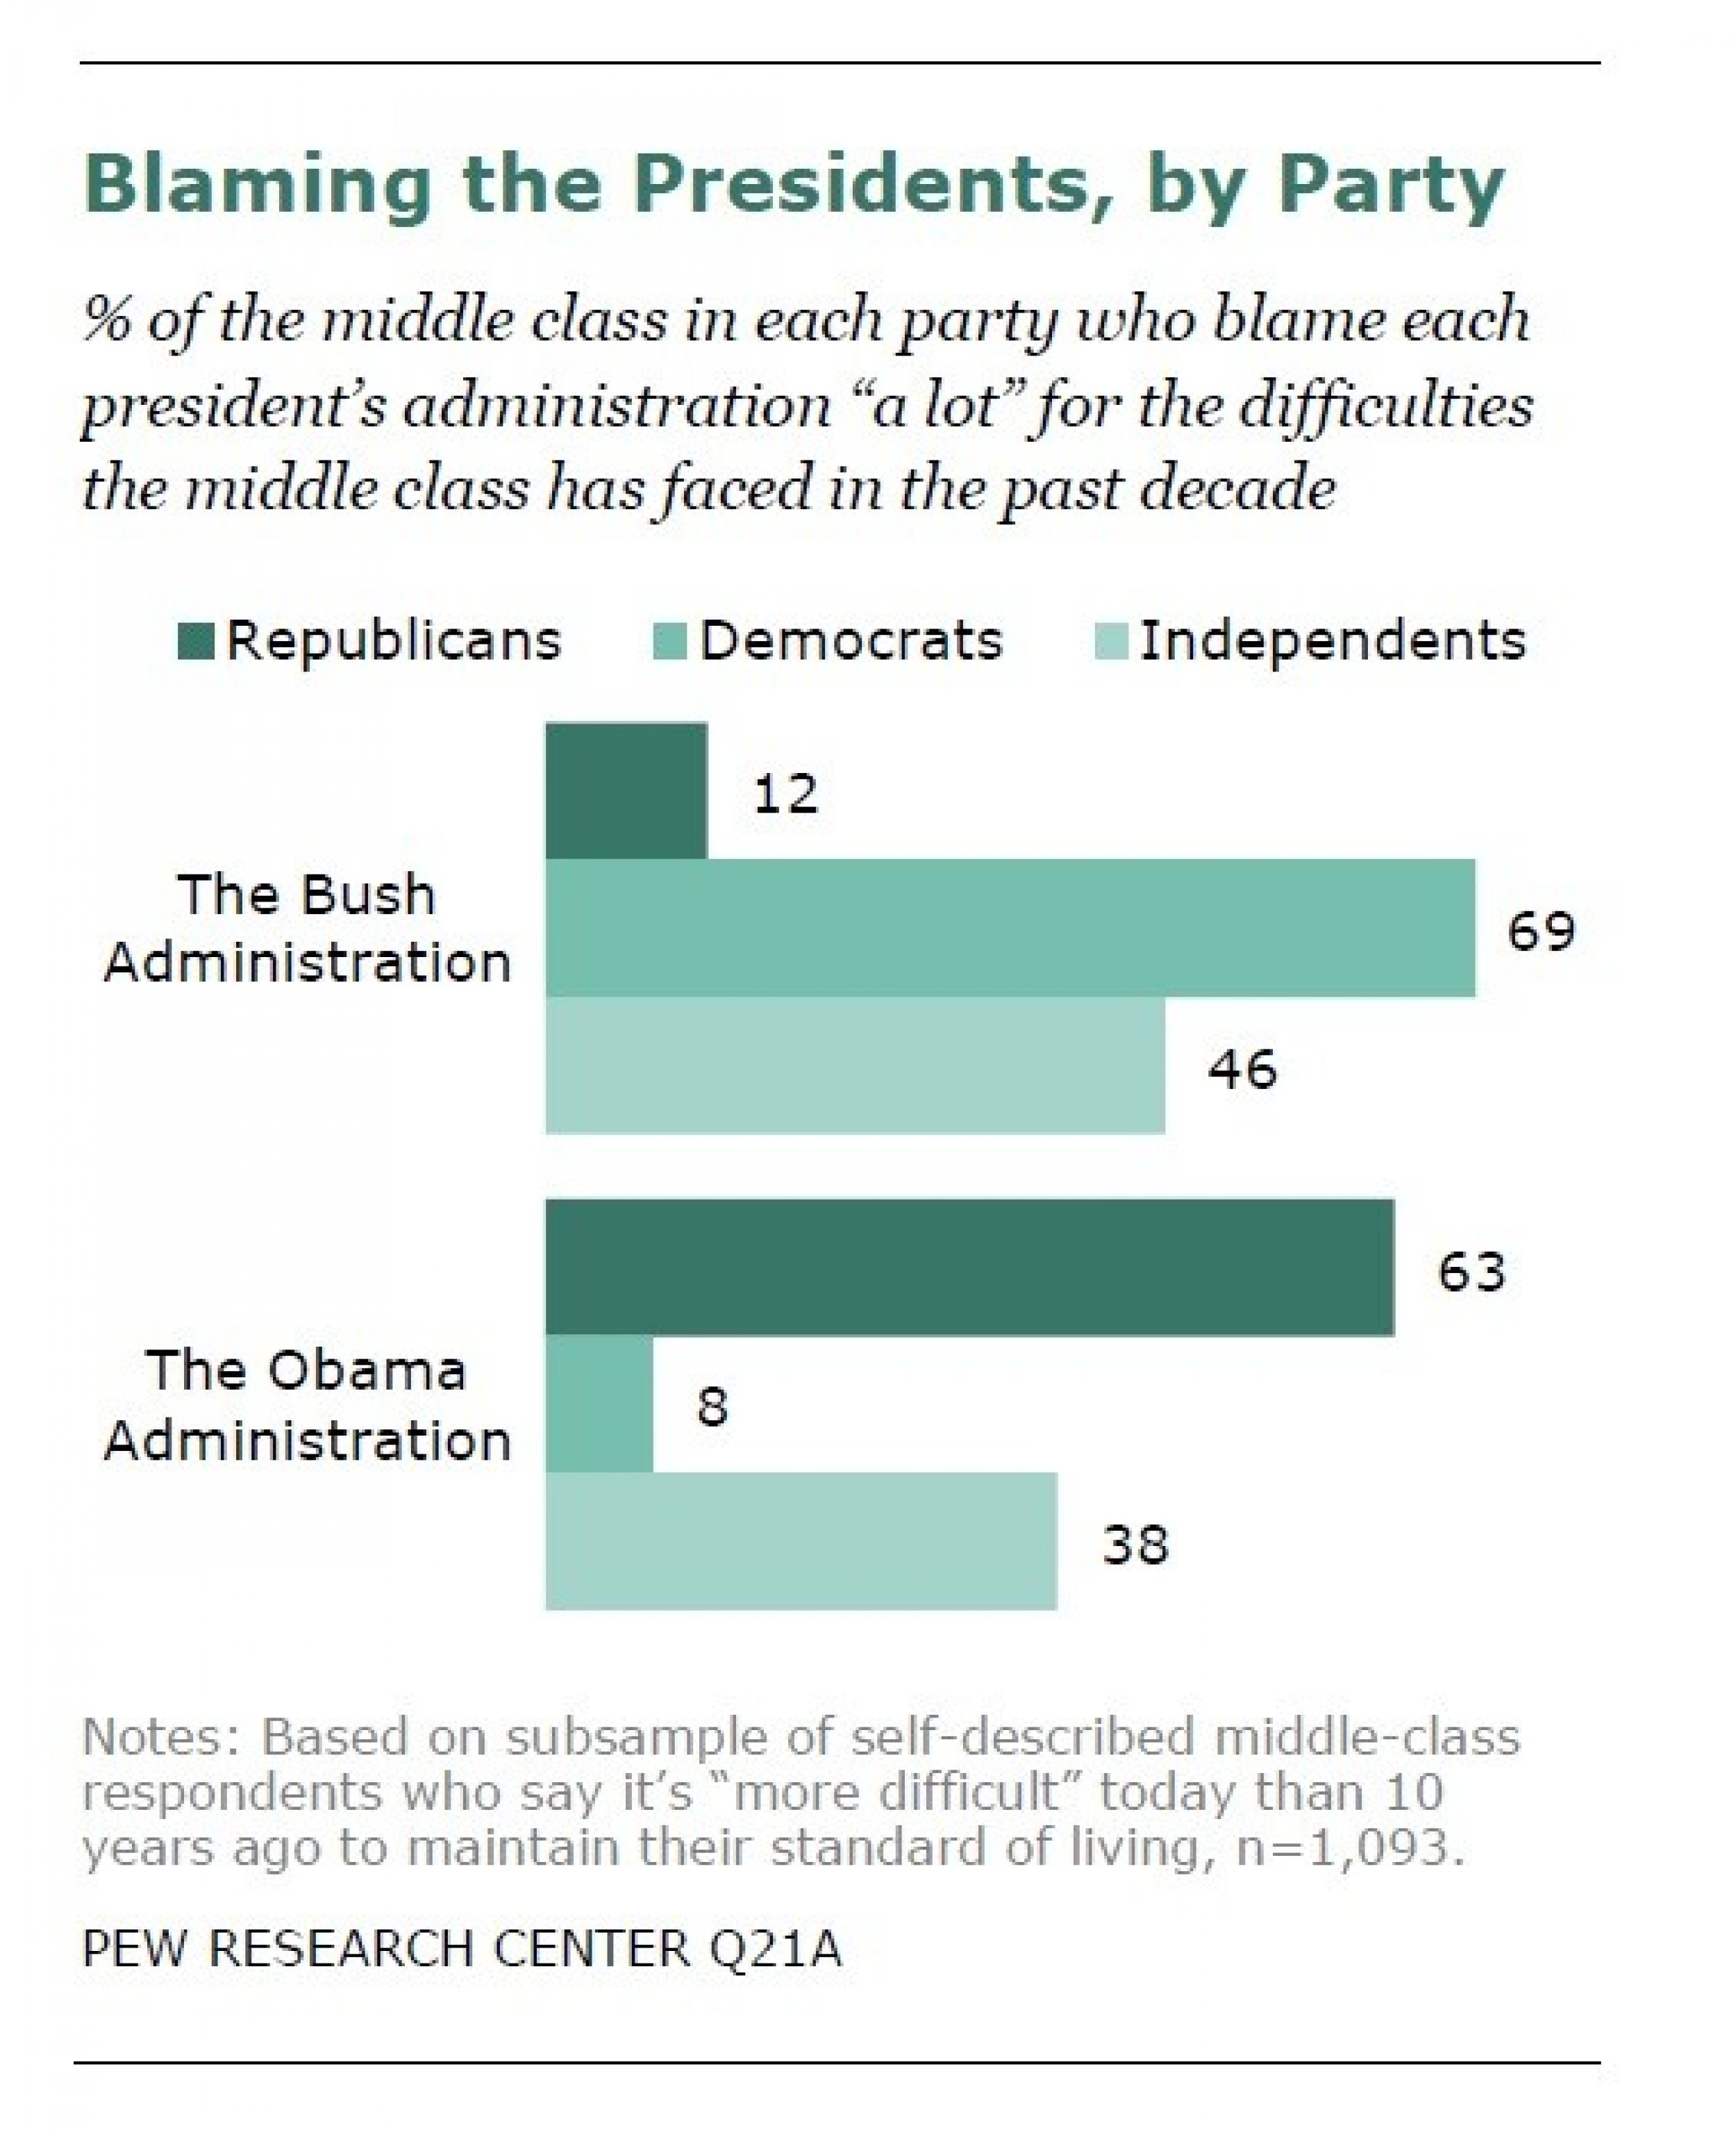 In an interesting finding, the reports survey found most in the middle class blamed the Bush administration and Congress more than the Obama administration for their current plight.